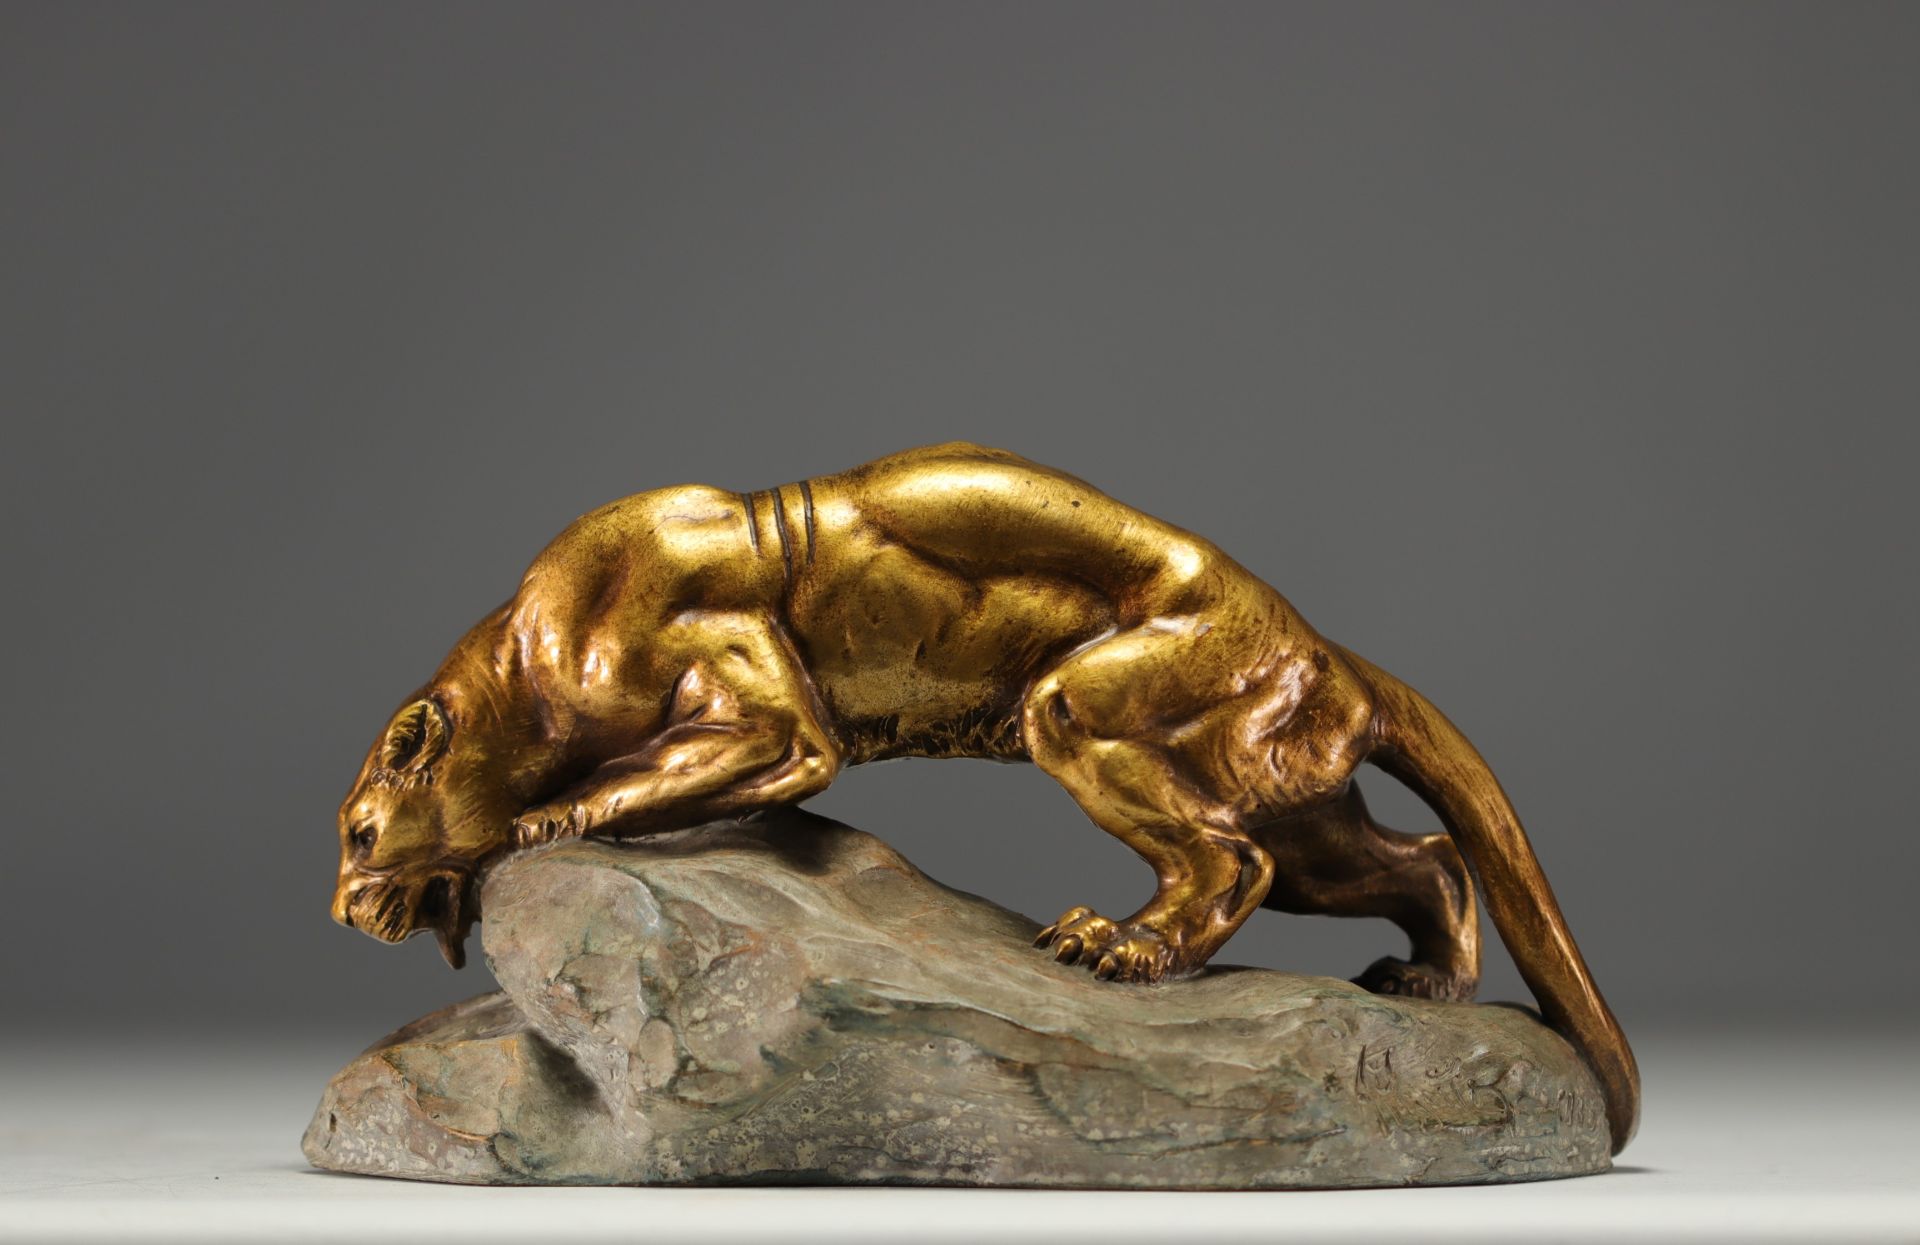 Armand FAGOTTO (19th - 20th century) "Panther stalking on a rock" Terracotta sculpture with golden p - Image 2 of 2